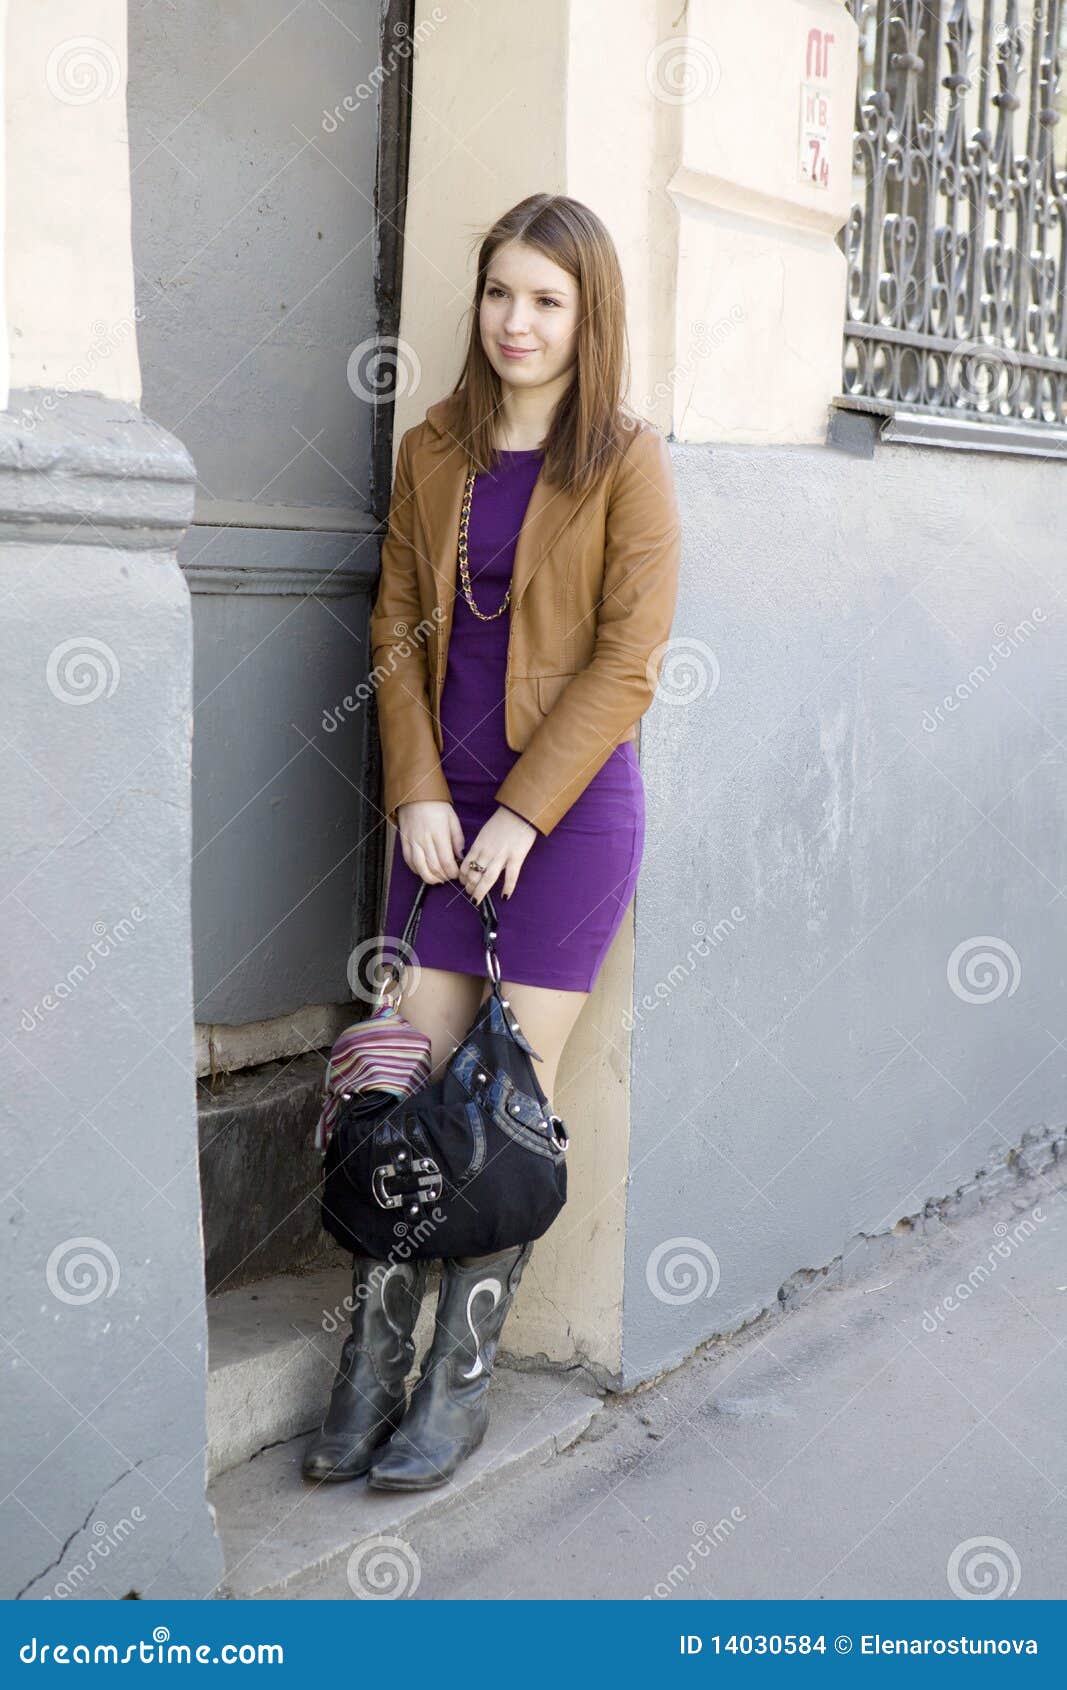 Smiling Woman With Long Hair In Short Skirt Stock Images 